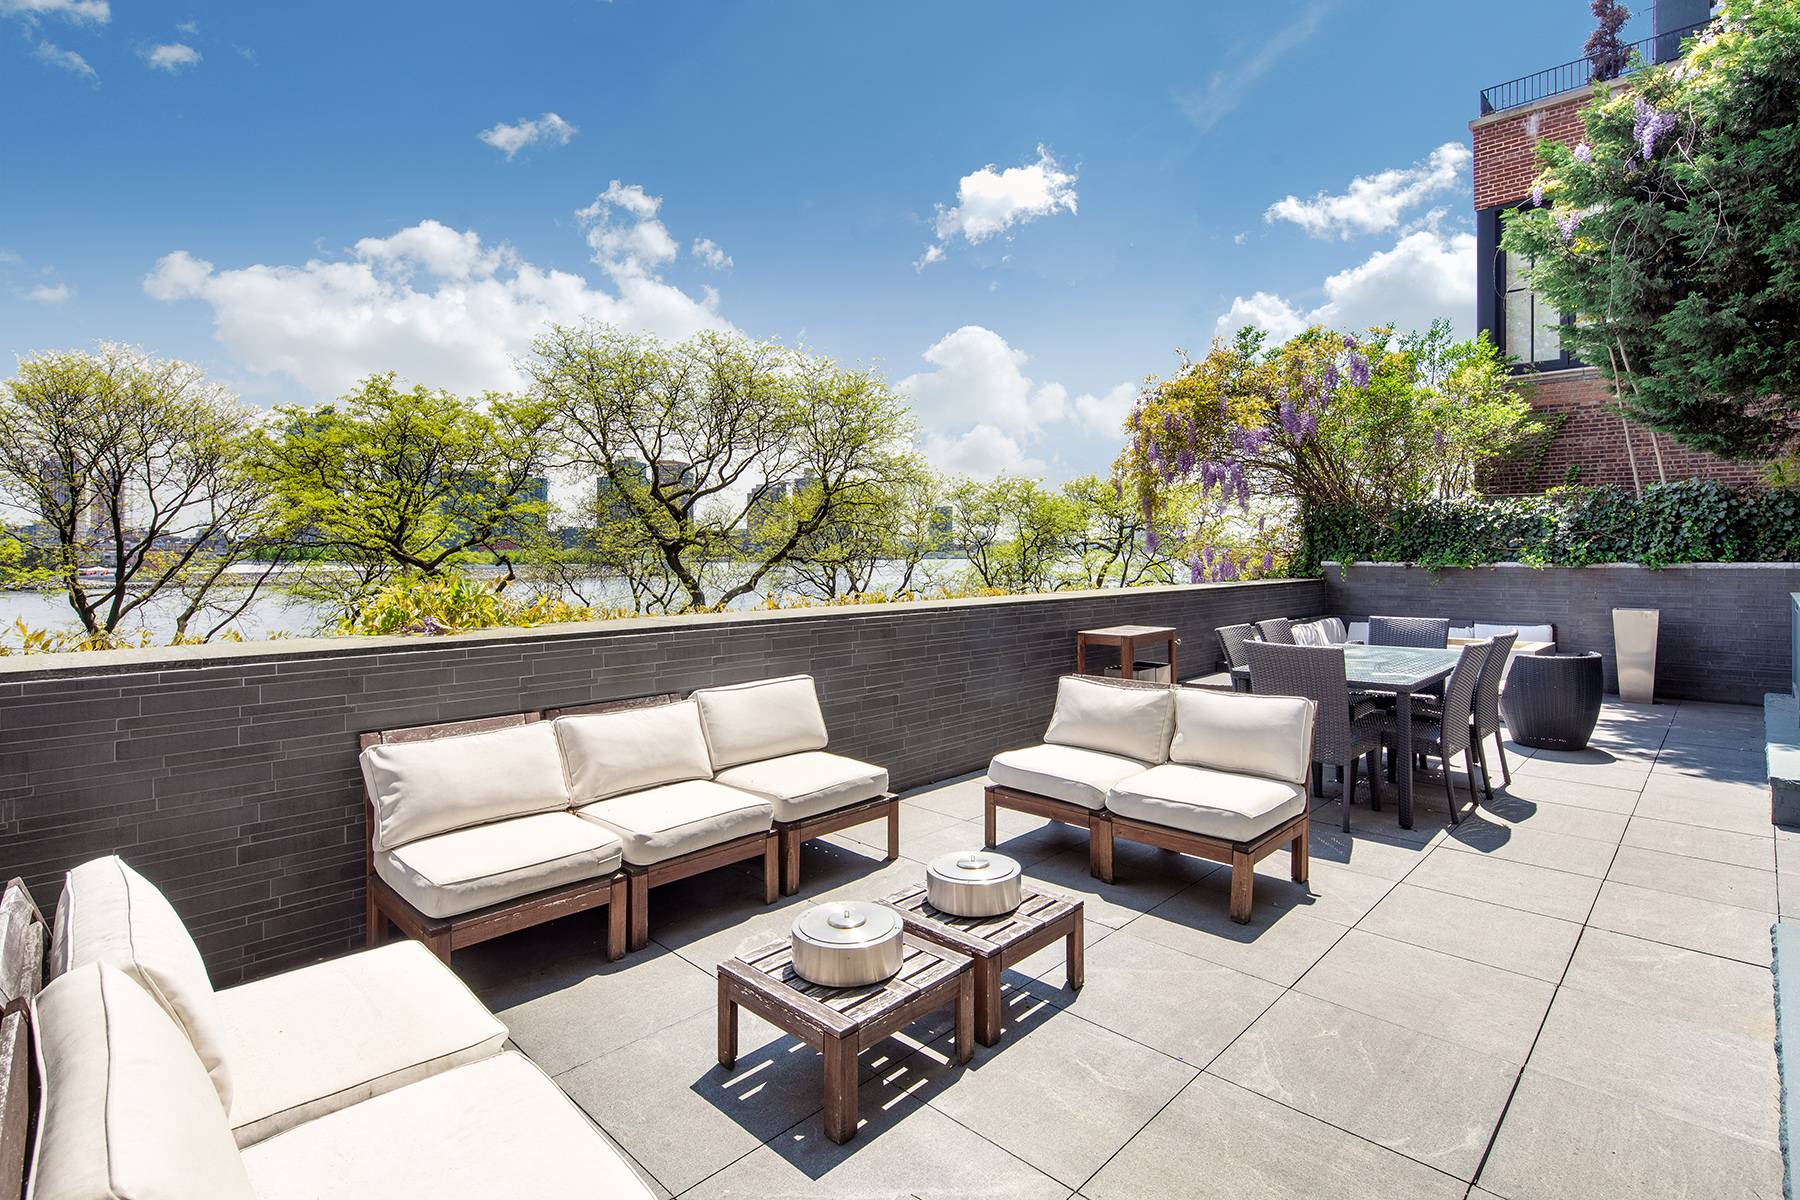 Duplex 3 Bedroom Condo with a 1,500 sf Outdoor Space in Midtown East